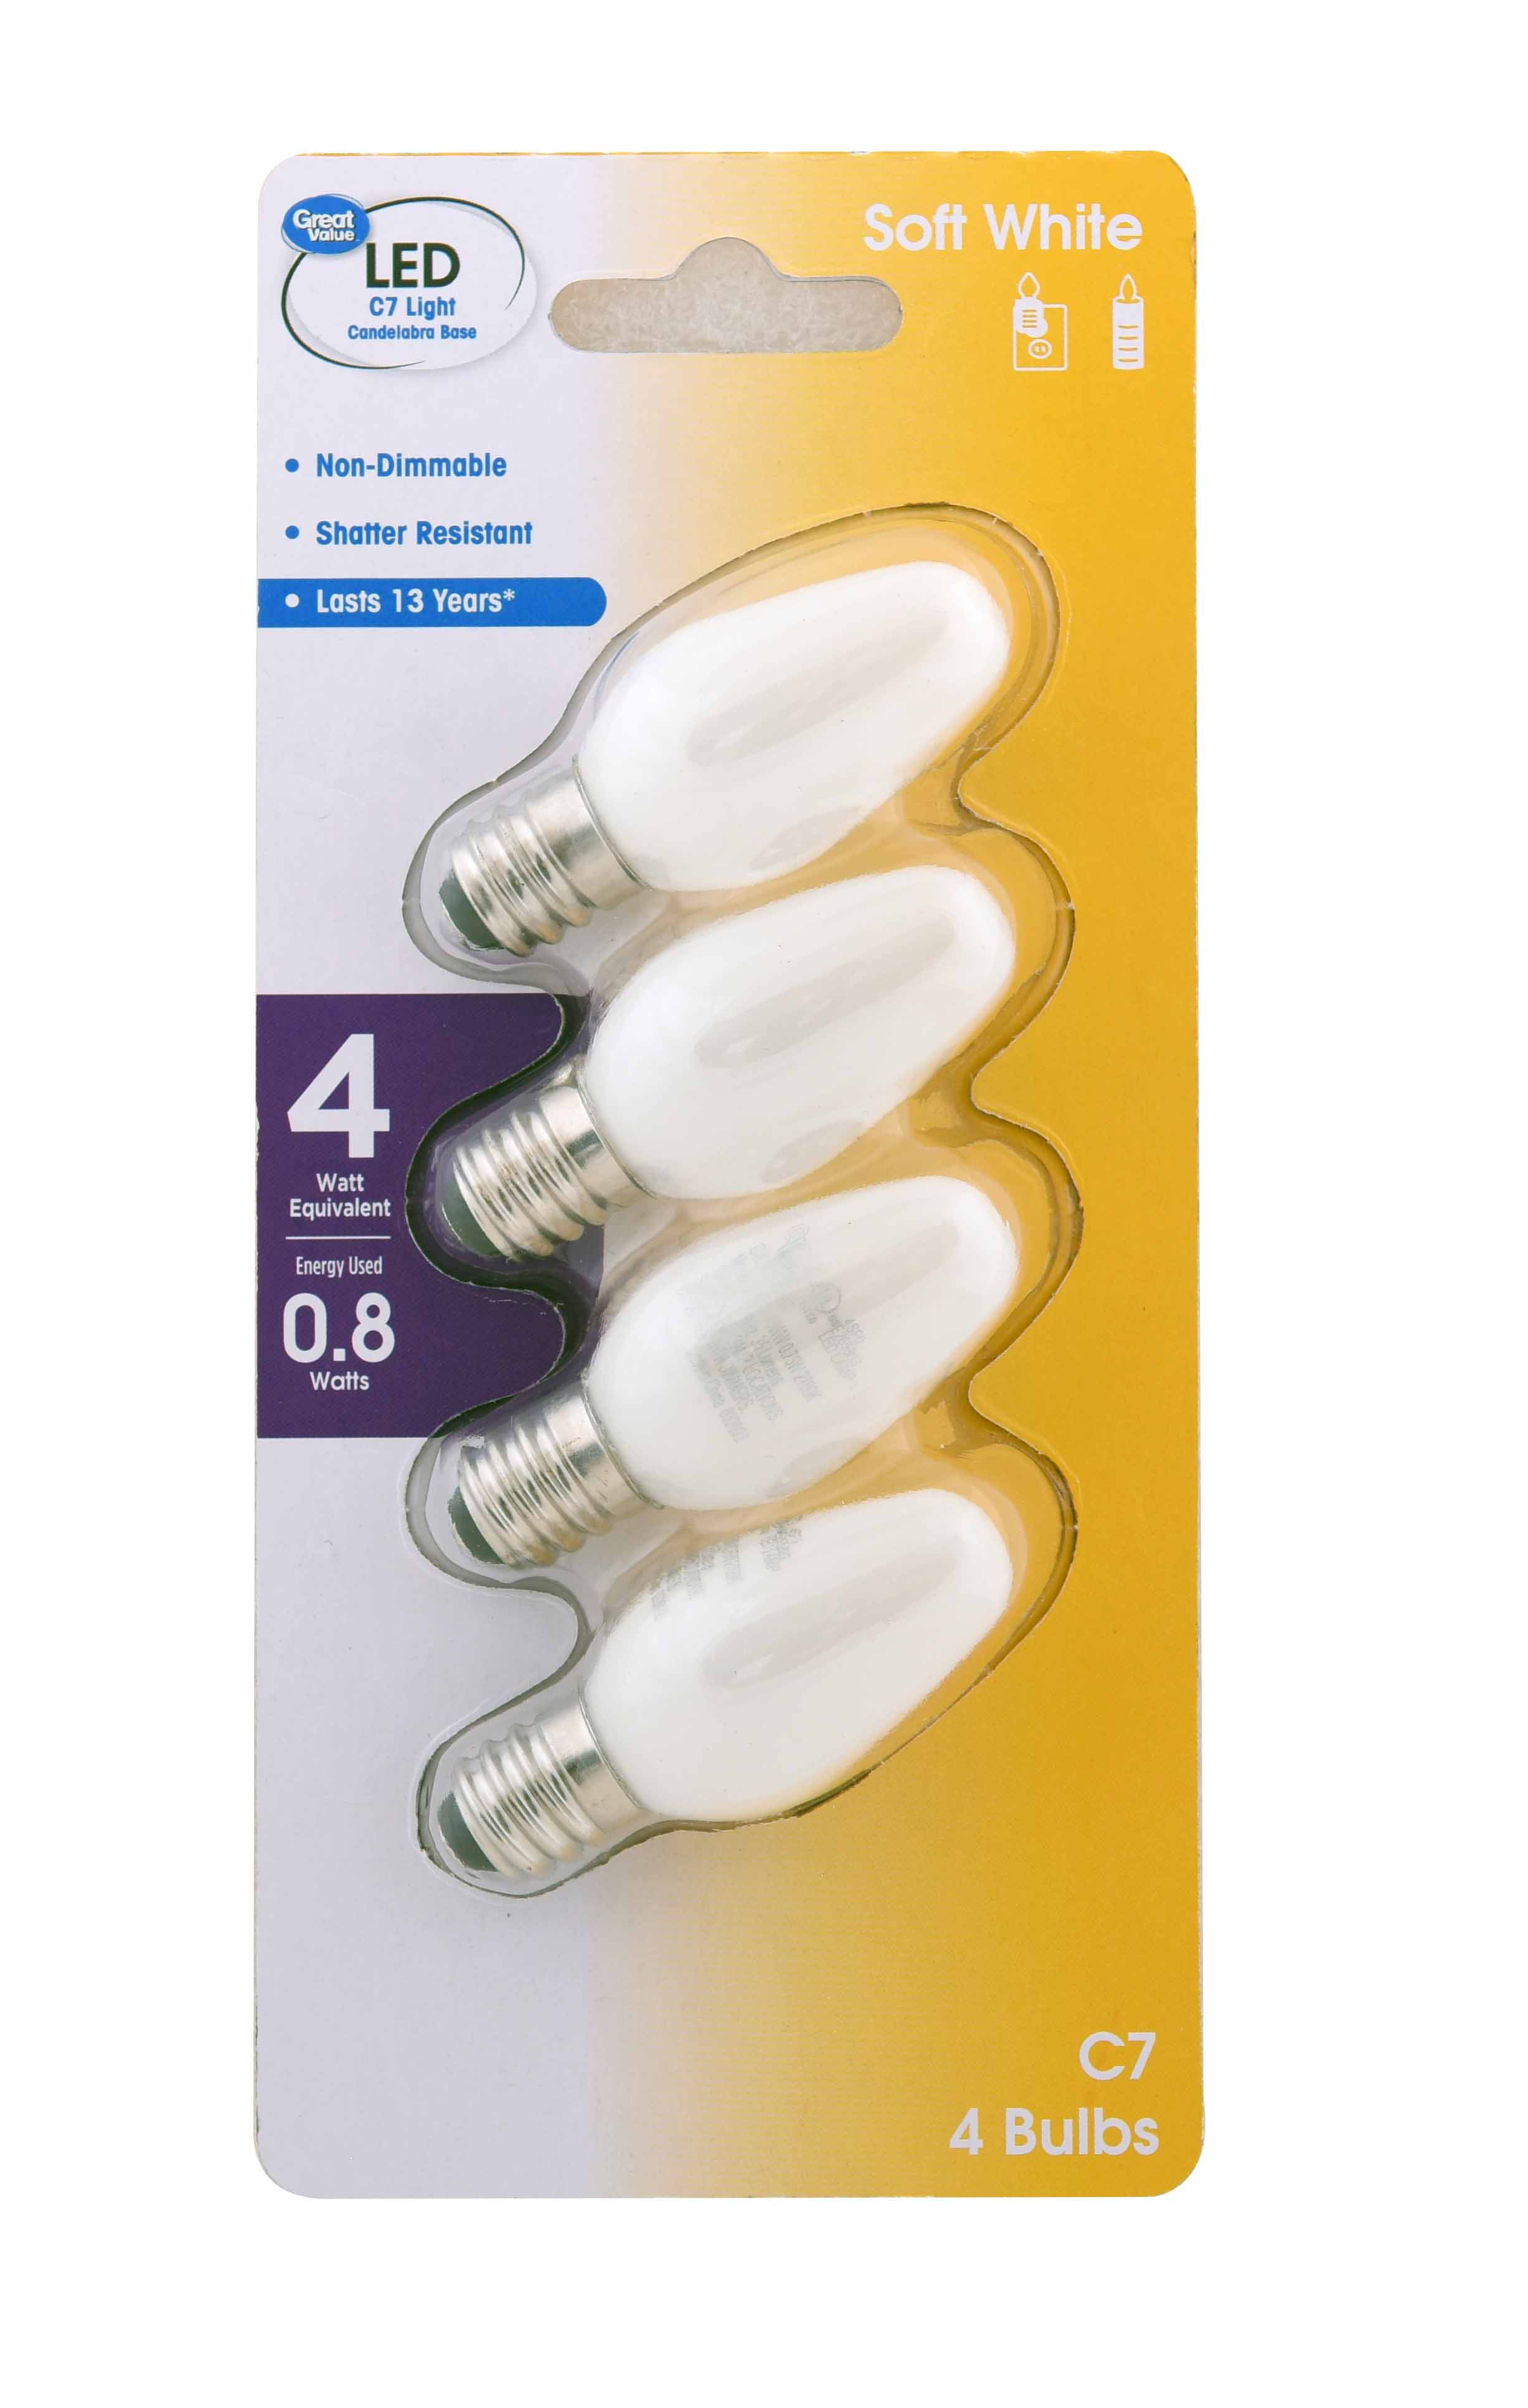 Great Value Led 0.75 Watts Soft White C7 Candelabra Base Bulbs, 4 count